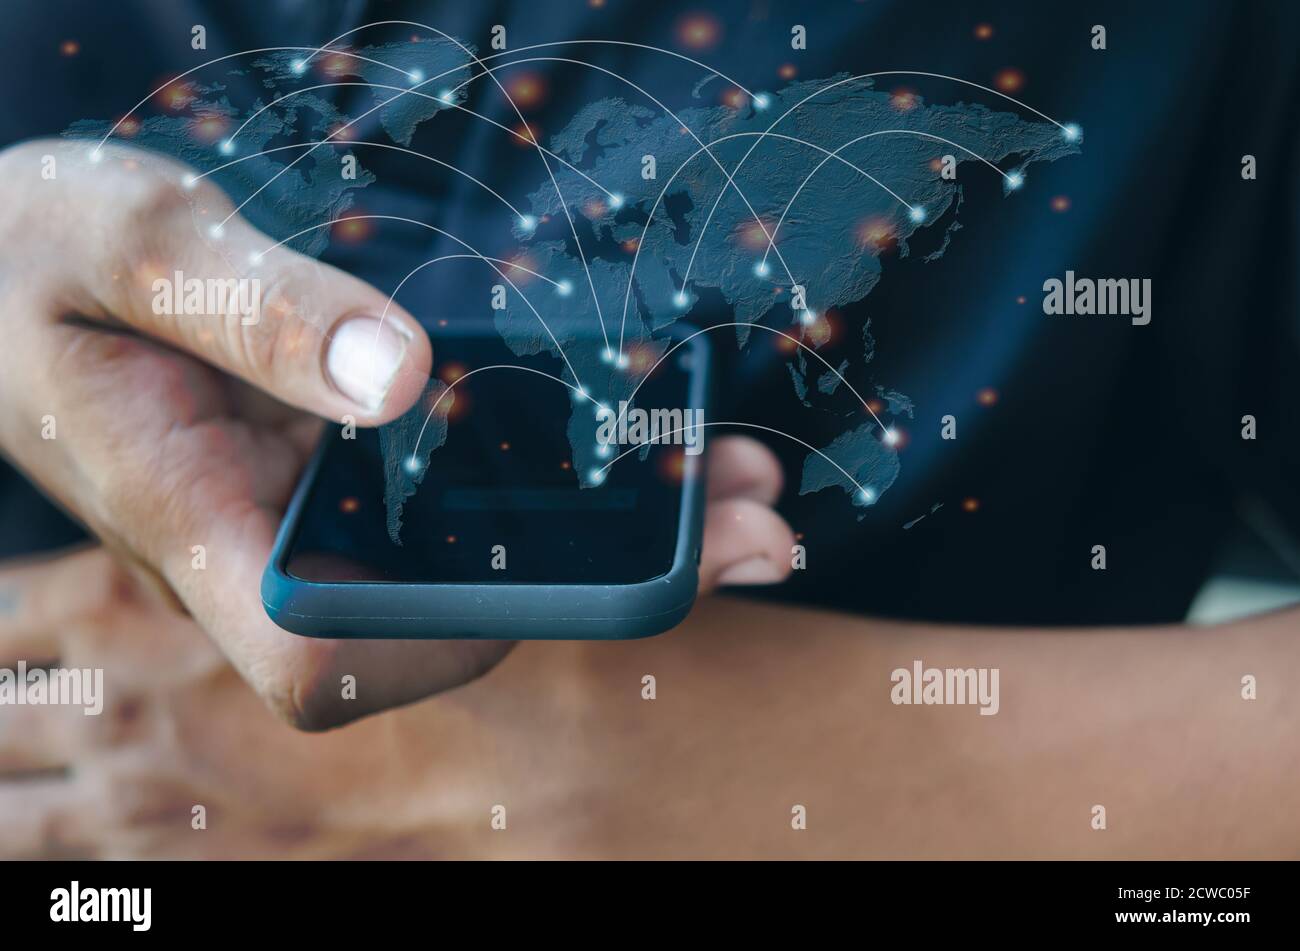 man hand holding a smartphone.Communicate with mobile phones and modern social networks around the world.Element of this image furnished by Nasa Stock Photo